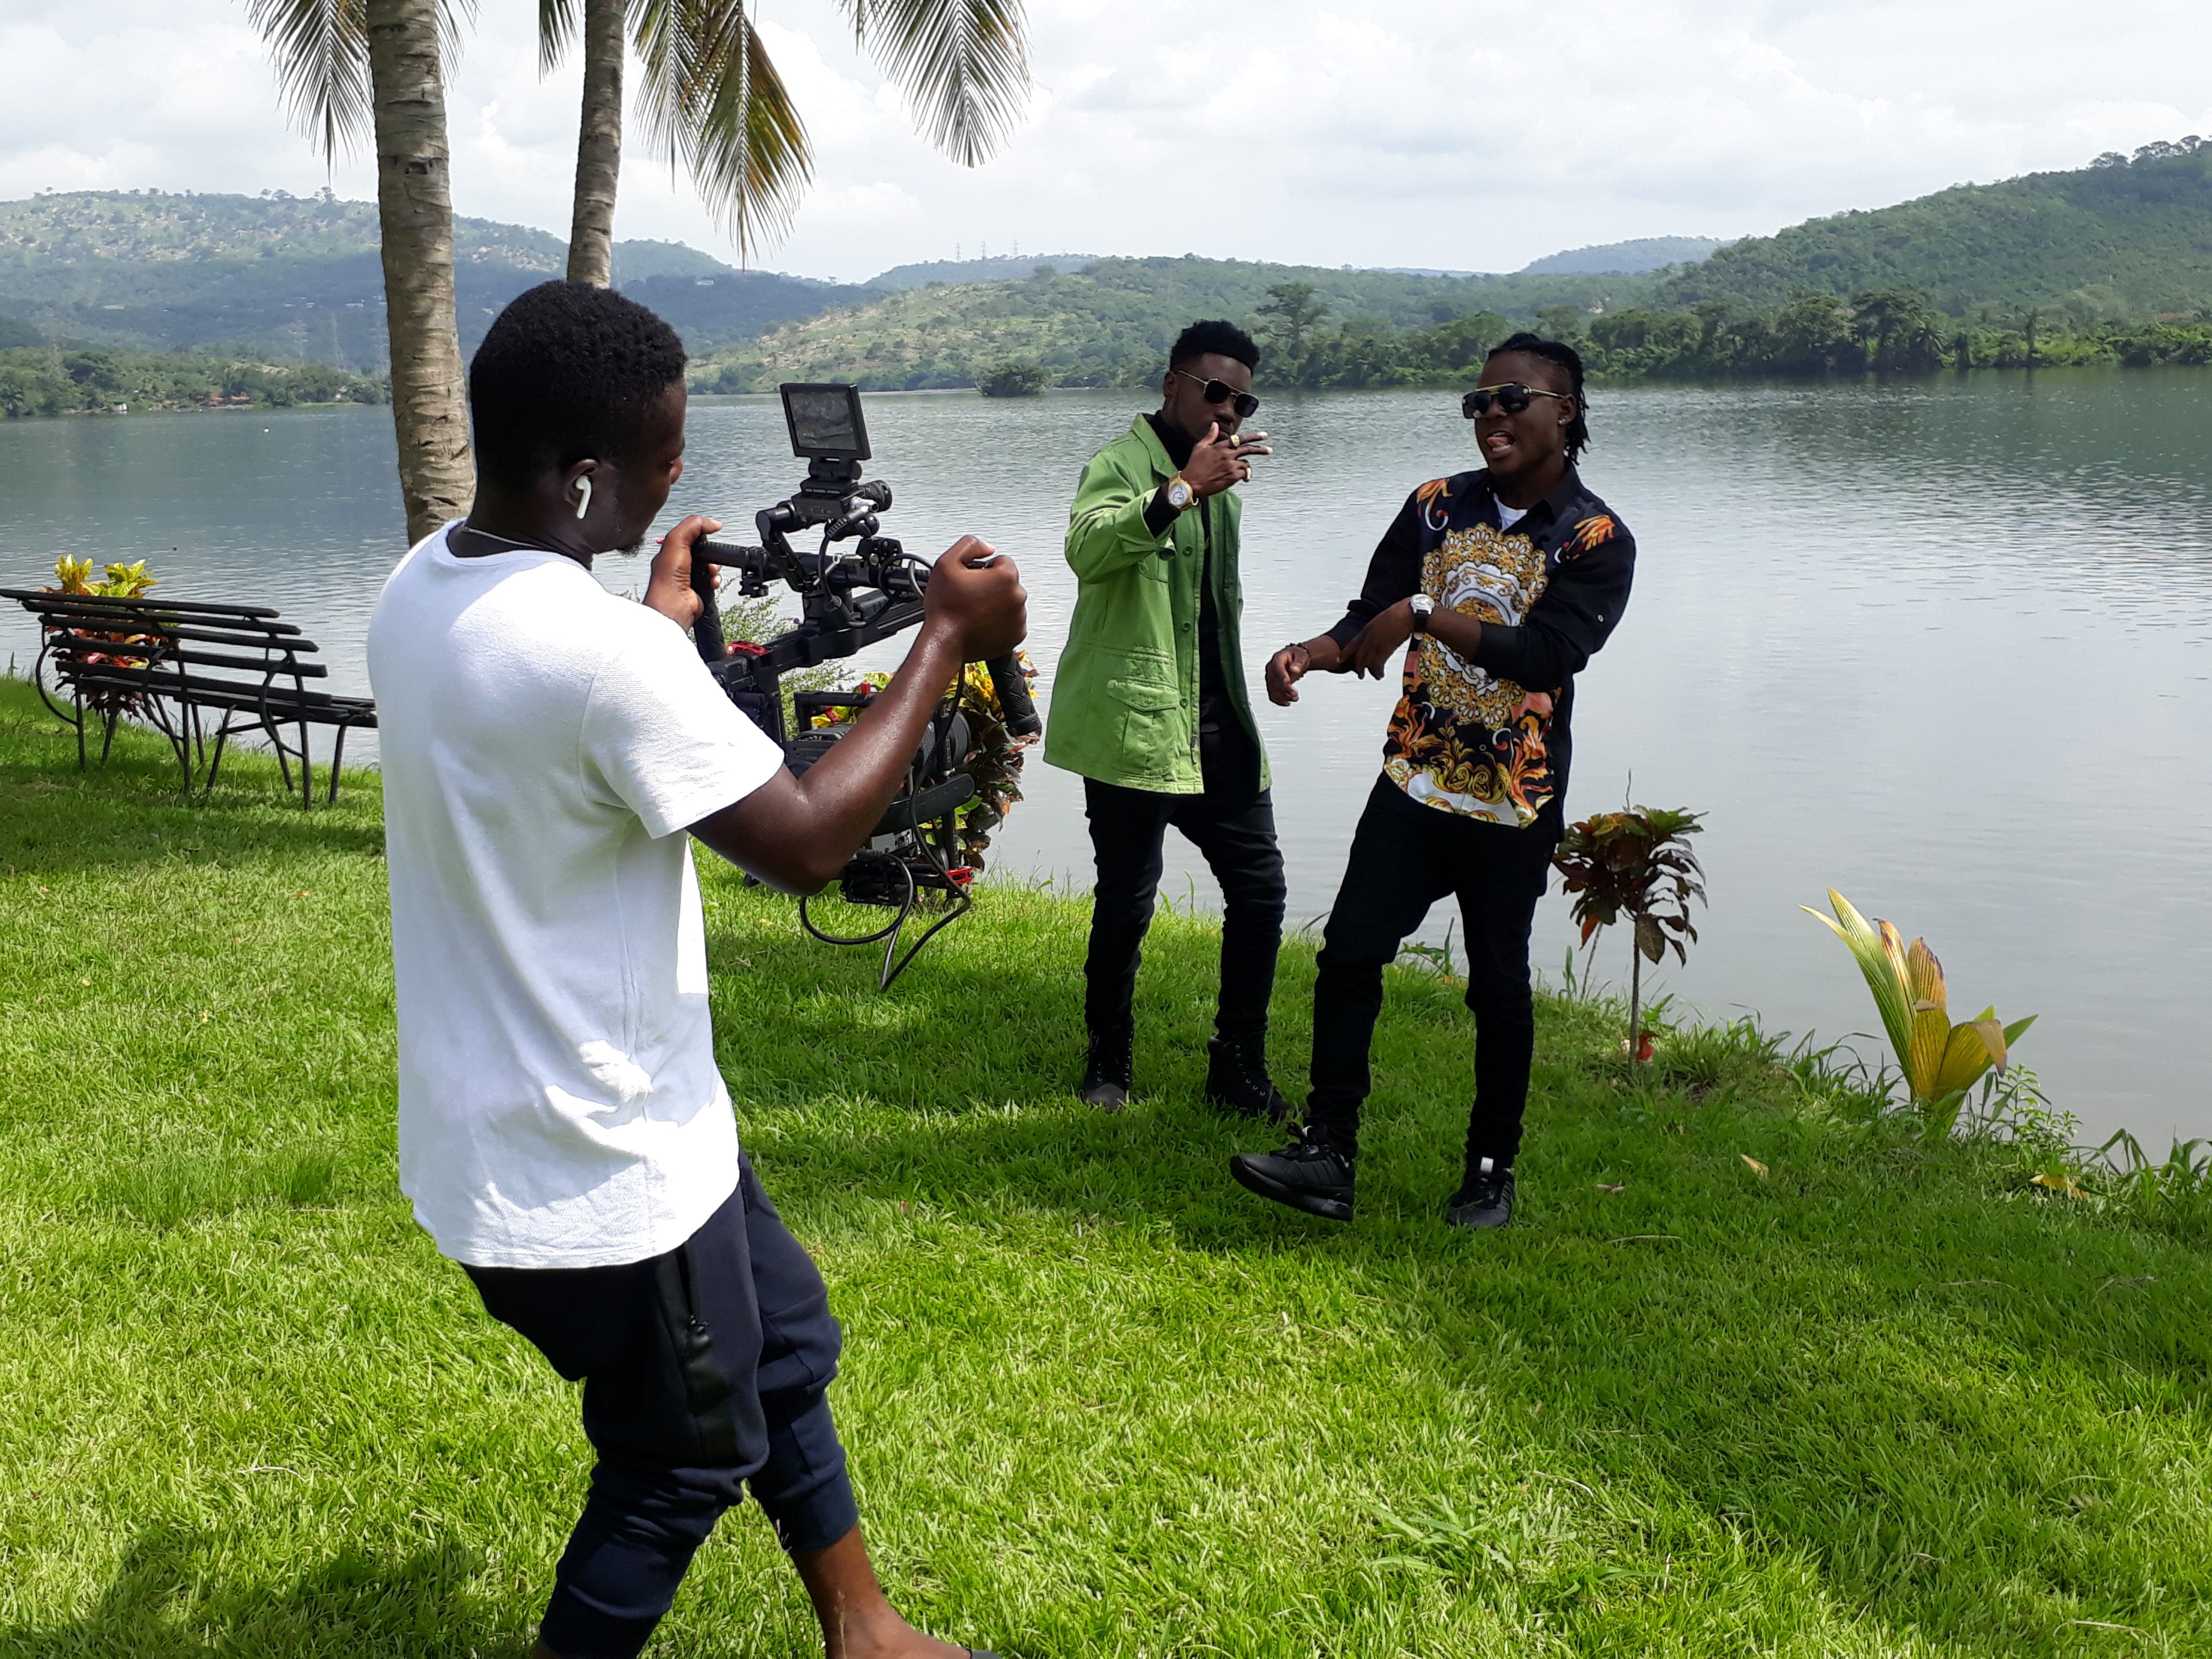 Behind-The-Scene: Donzy Is Shooting A Music Video For His Upcoming Single, ”Heart away” With Spicer  And This Is What You Need To Know.